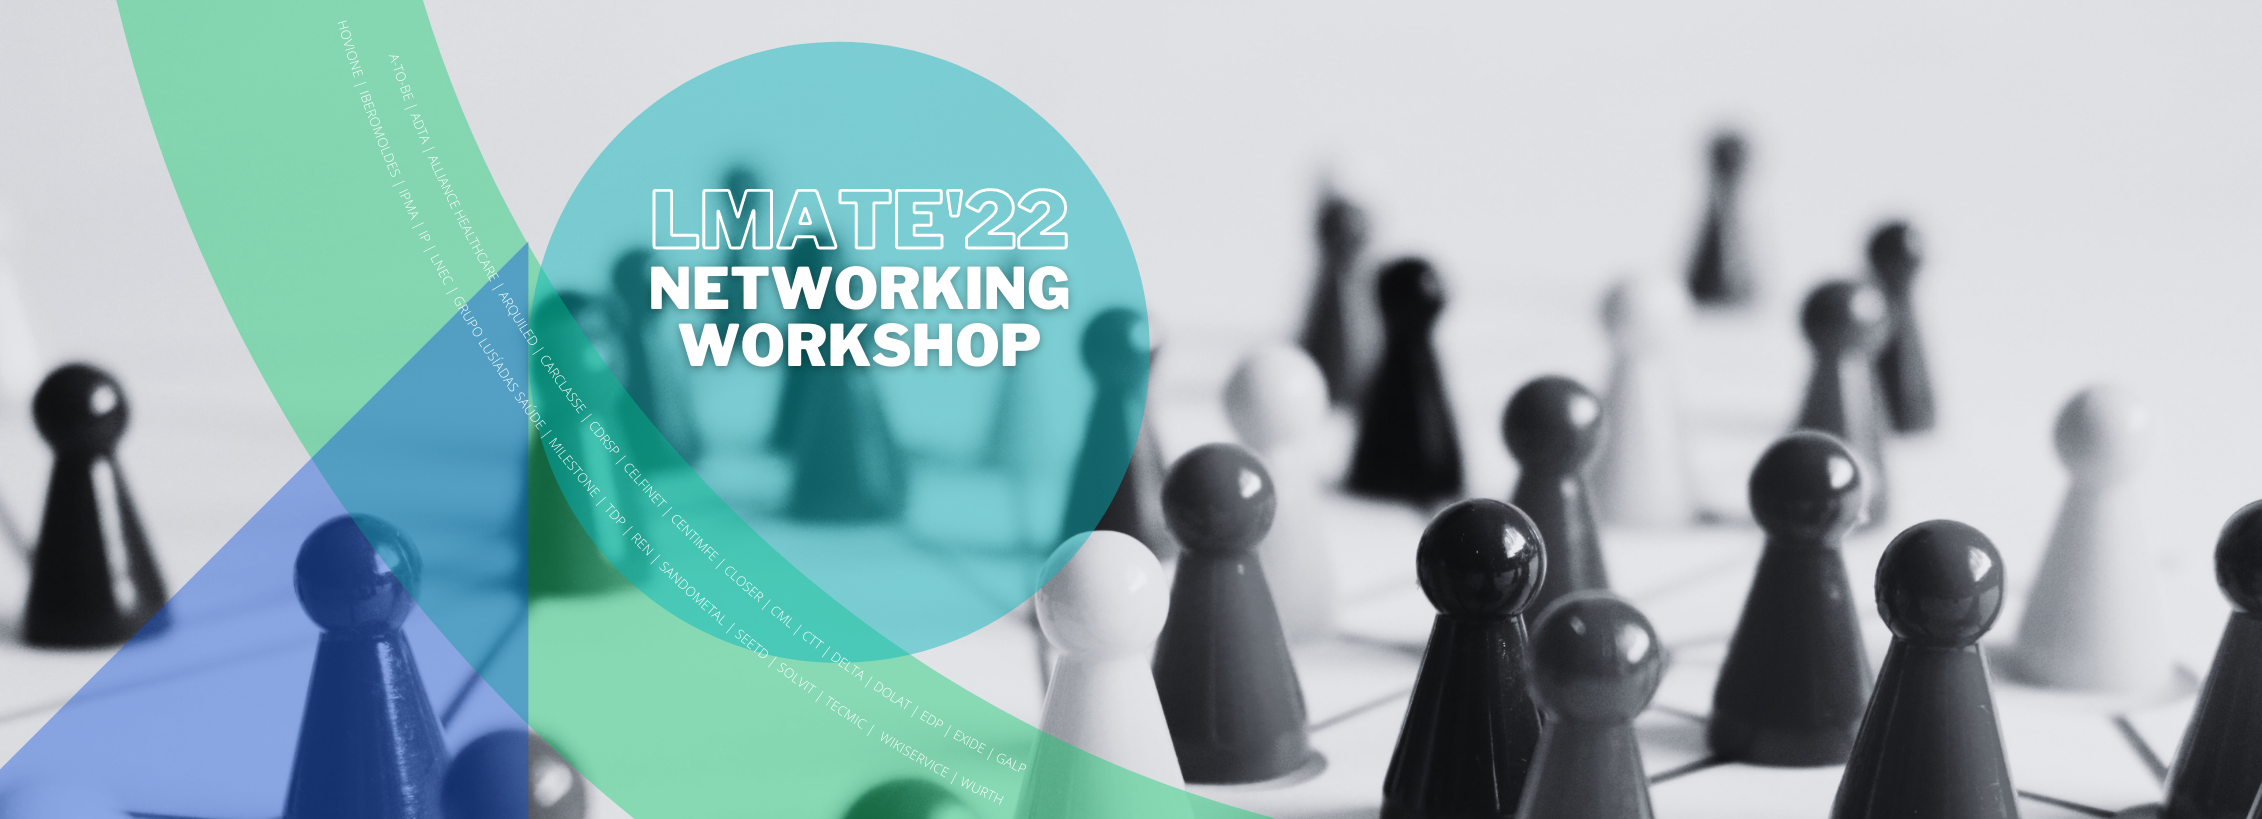 LMATE22 Networking Workshop Evento